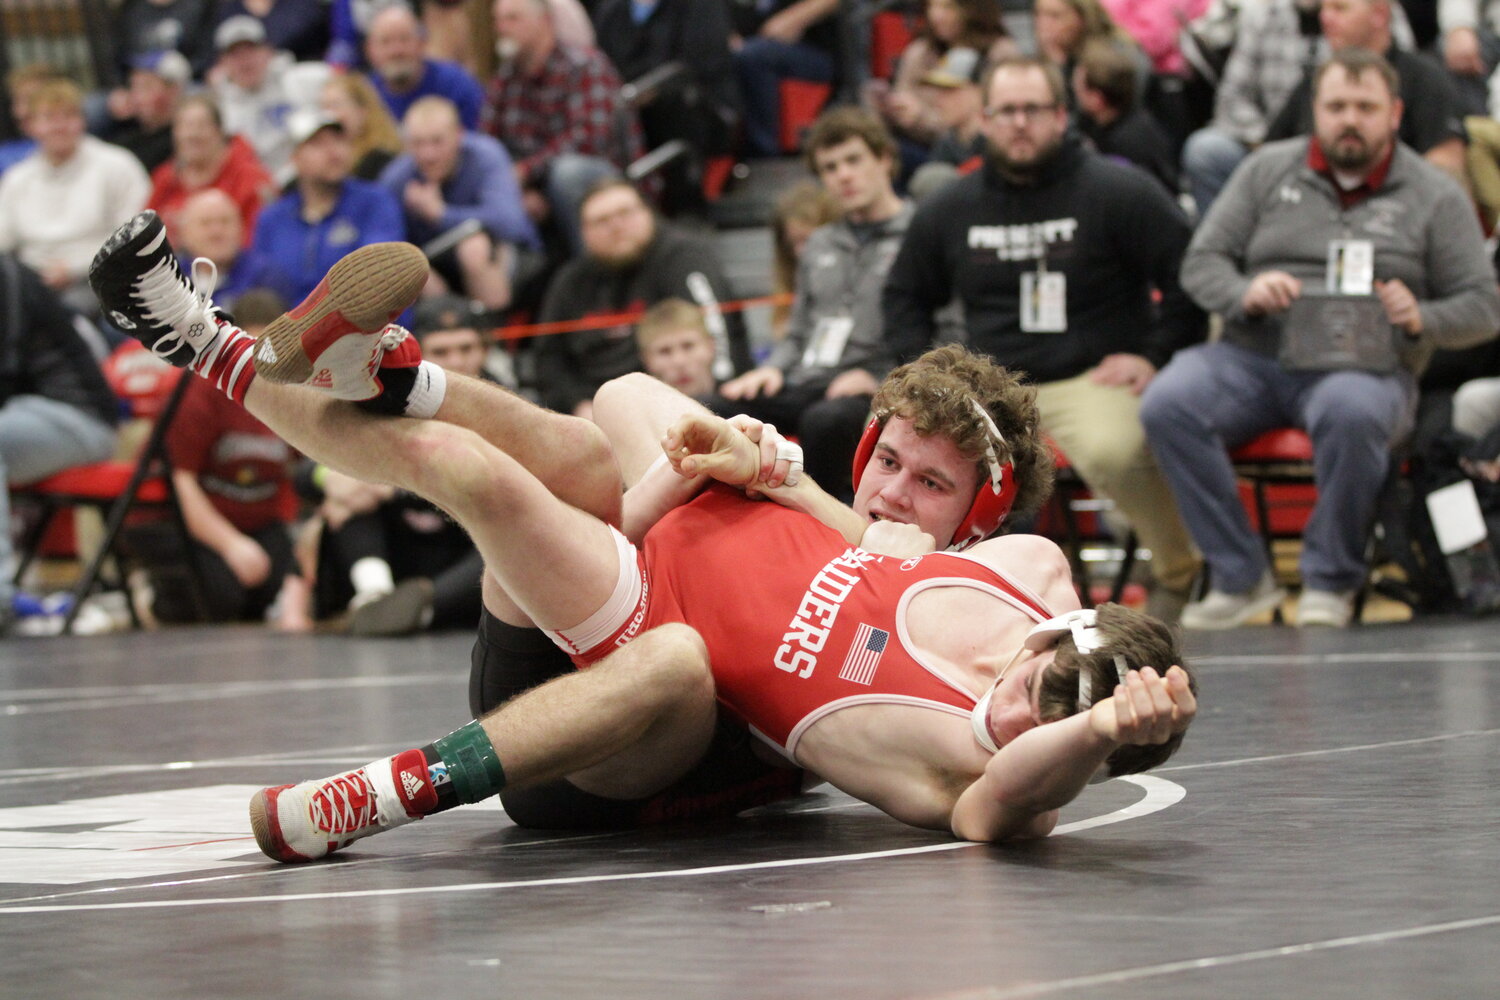 Prescott senior Nolan Thomley has proven to be a leader in the wrestling room so far this year, under the direction of new head coach Ian Ruble.